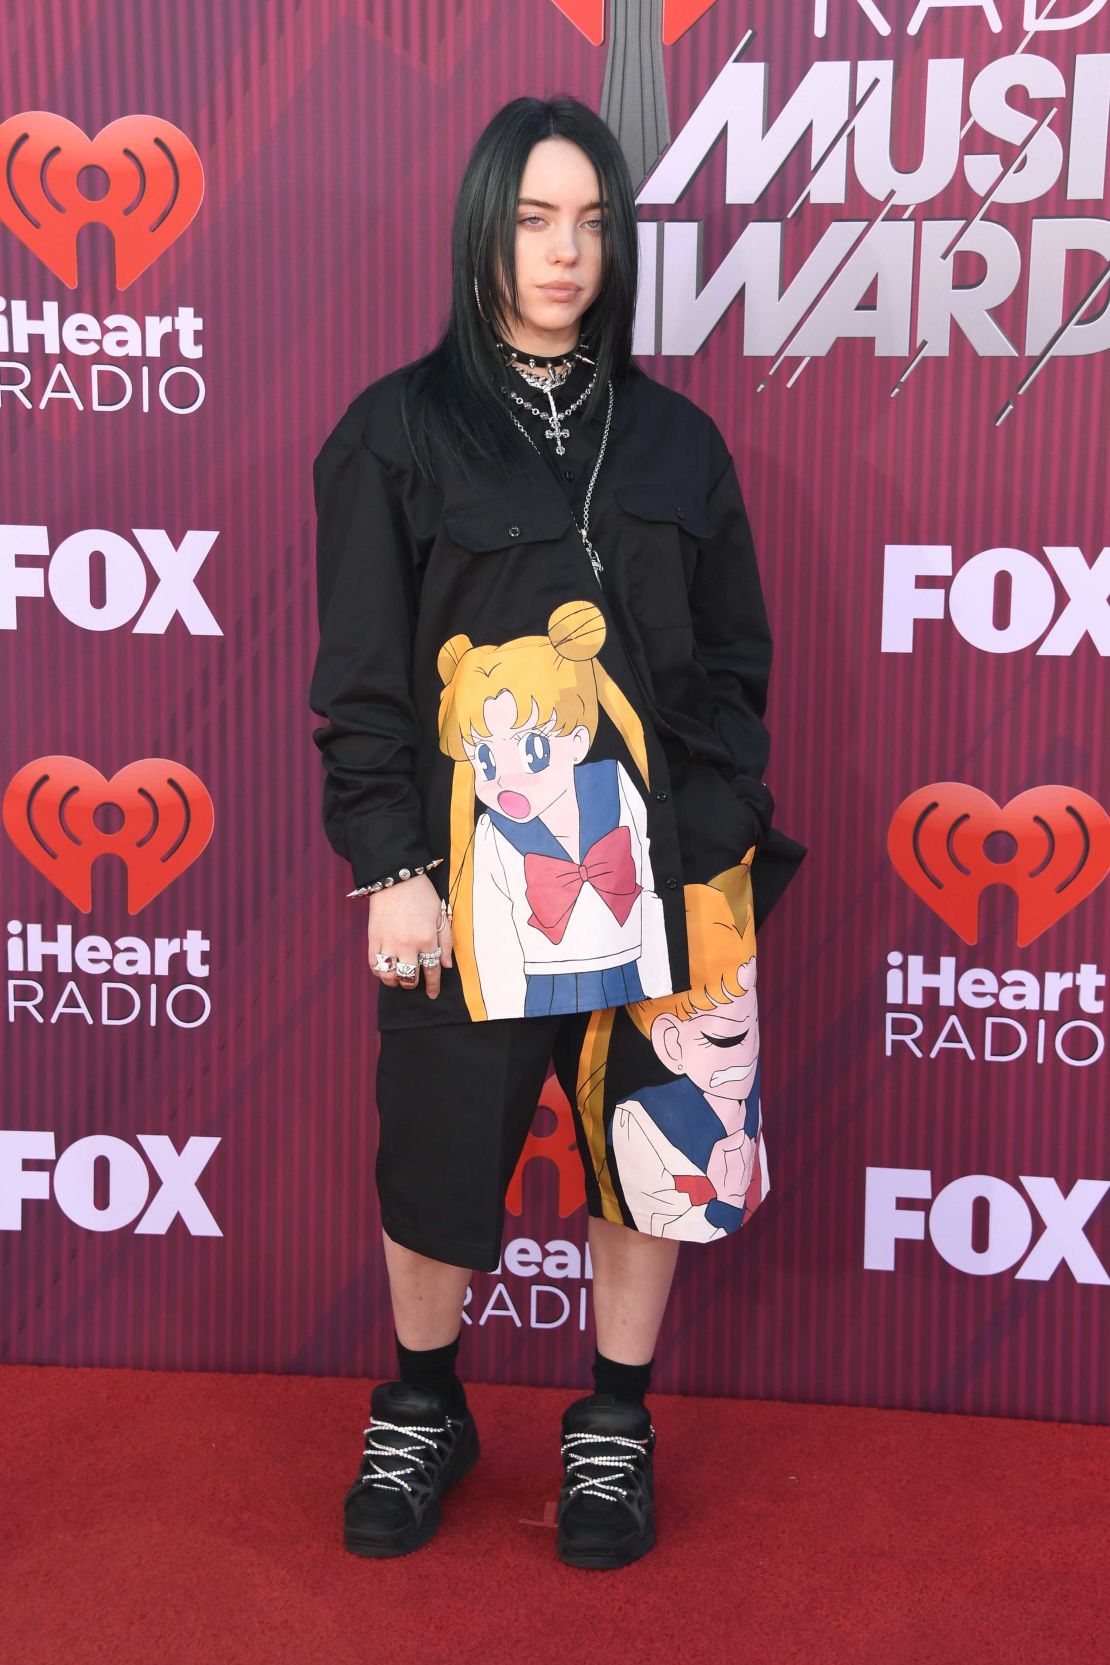 Billie Eilish at 2019 iHeartRadio Music Awards in March 2019.